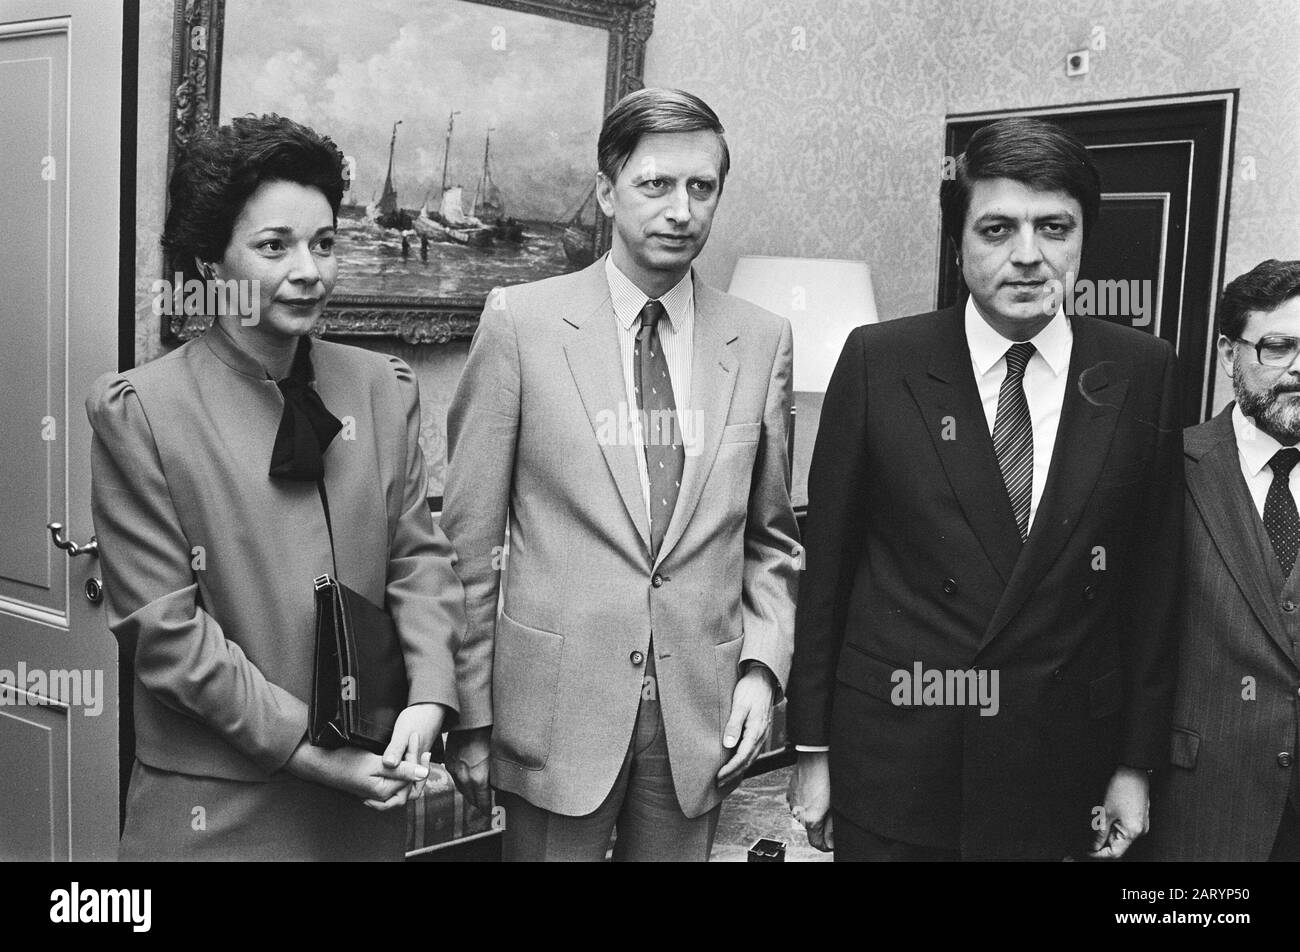 Chairman of the House Dolman (m) received today Nora Astorga (vice minister BuZa Nicaraqua) (l) and Sergio Ramirez (member of the Nat government Nicaraqua)/Date: 3 May 1982 Location: Nicaragua Keywords: politicians Stock Photo